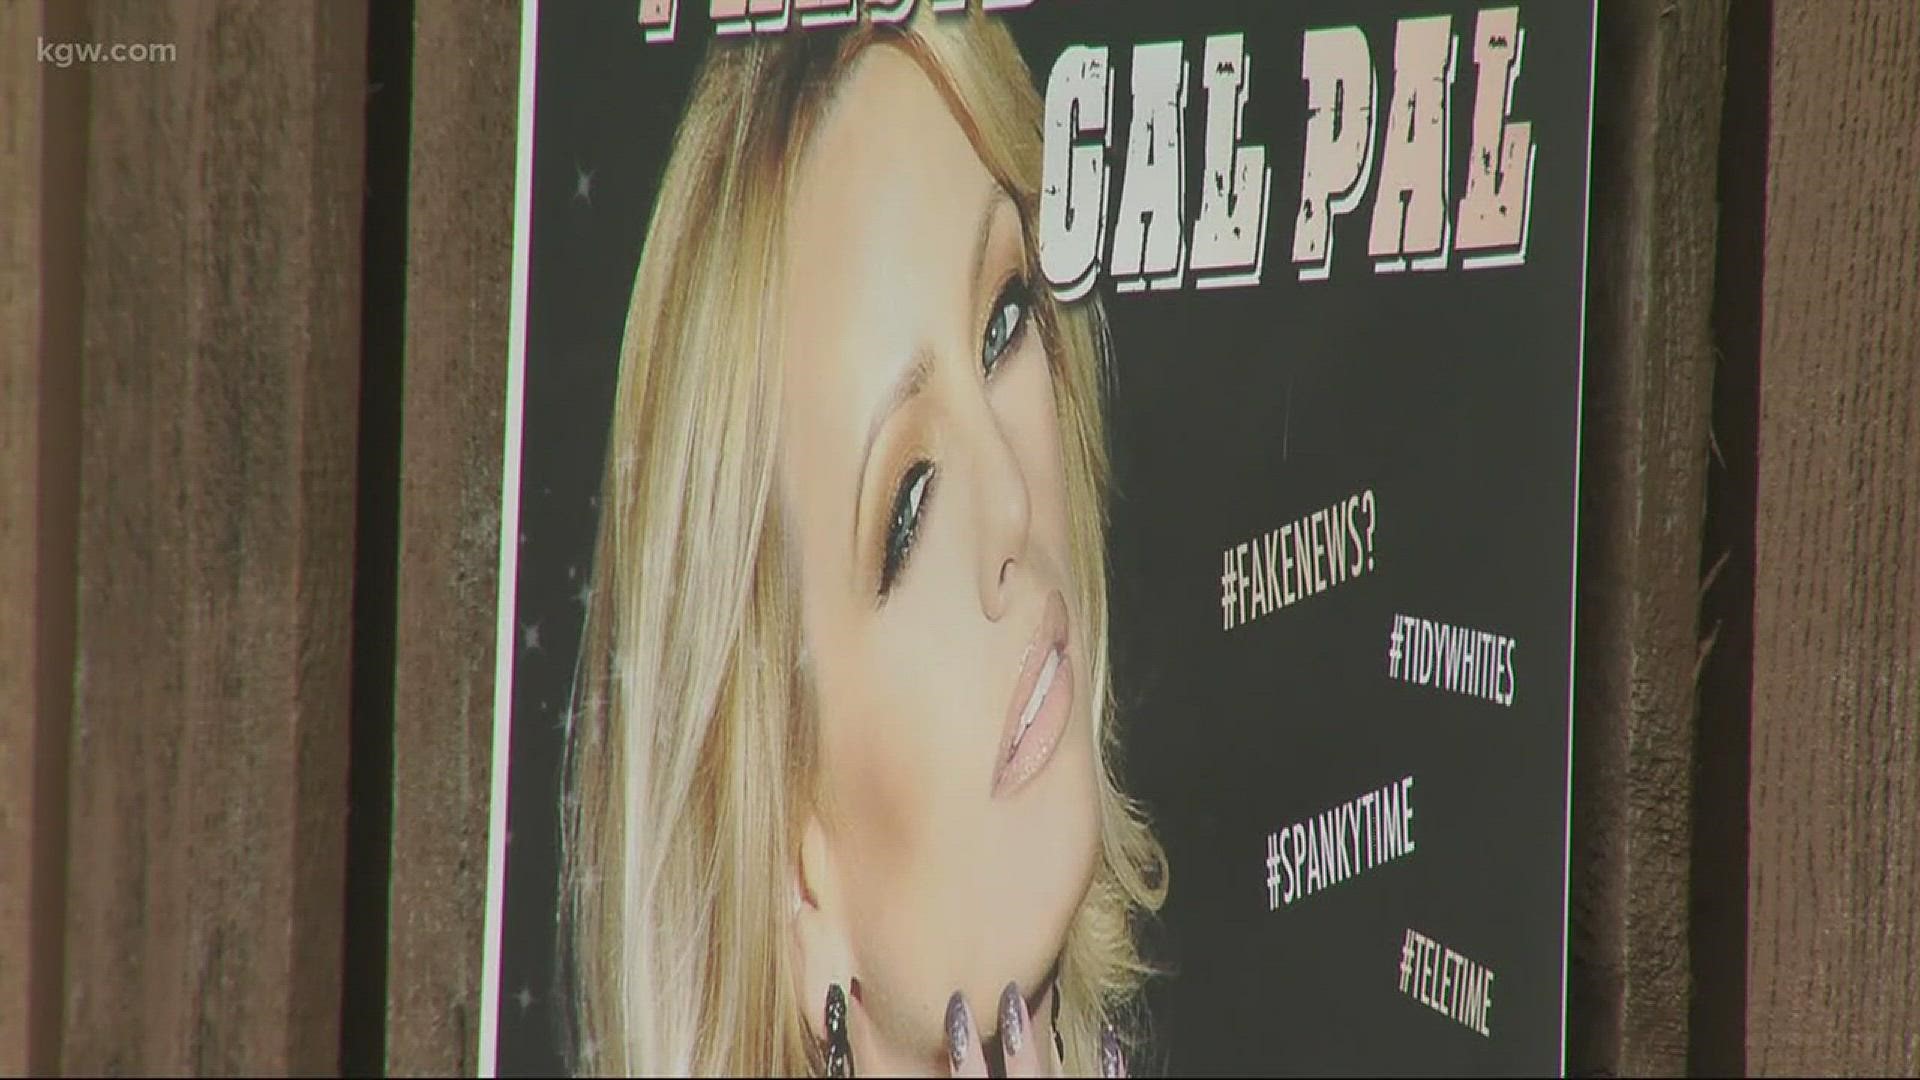 Stormy Daniels stops in Tualatin for final night of Oregon tour.